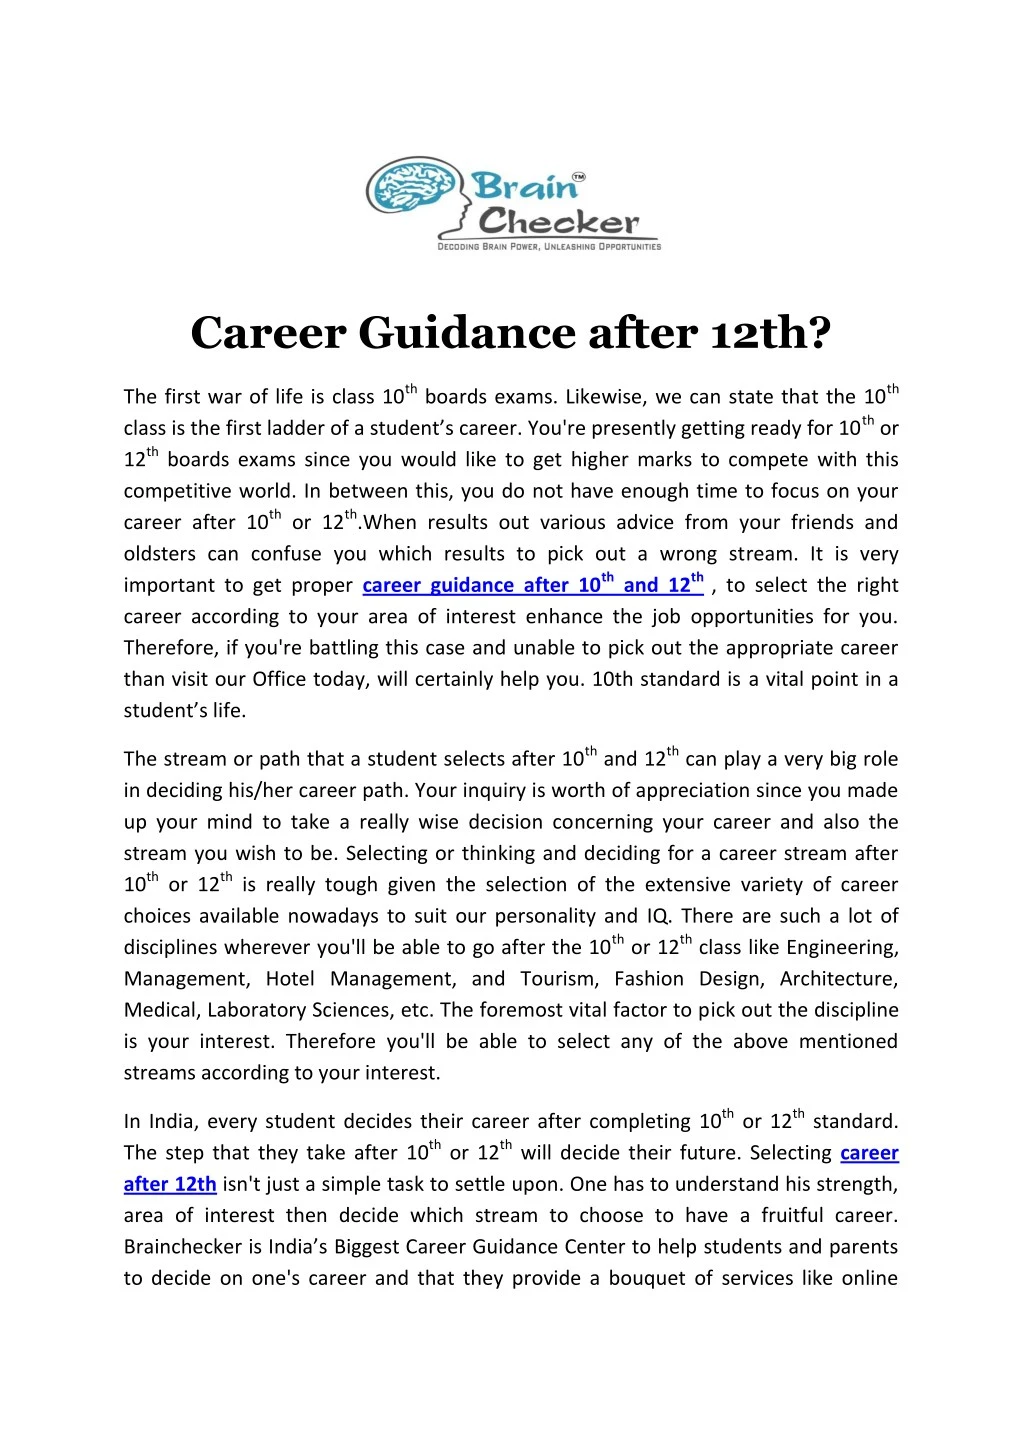 thesis on career guidance